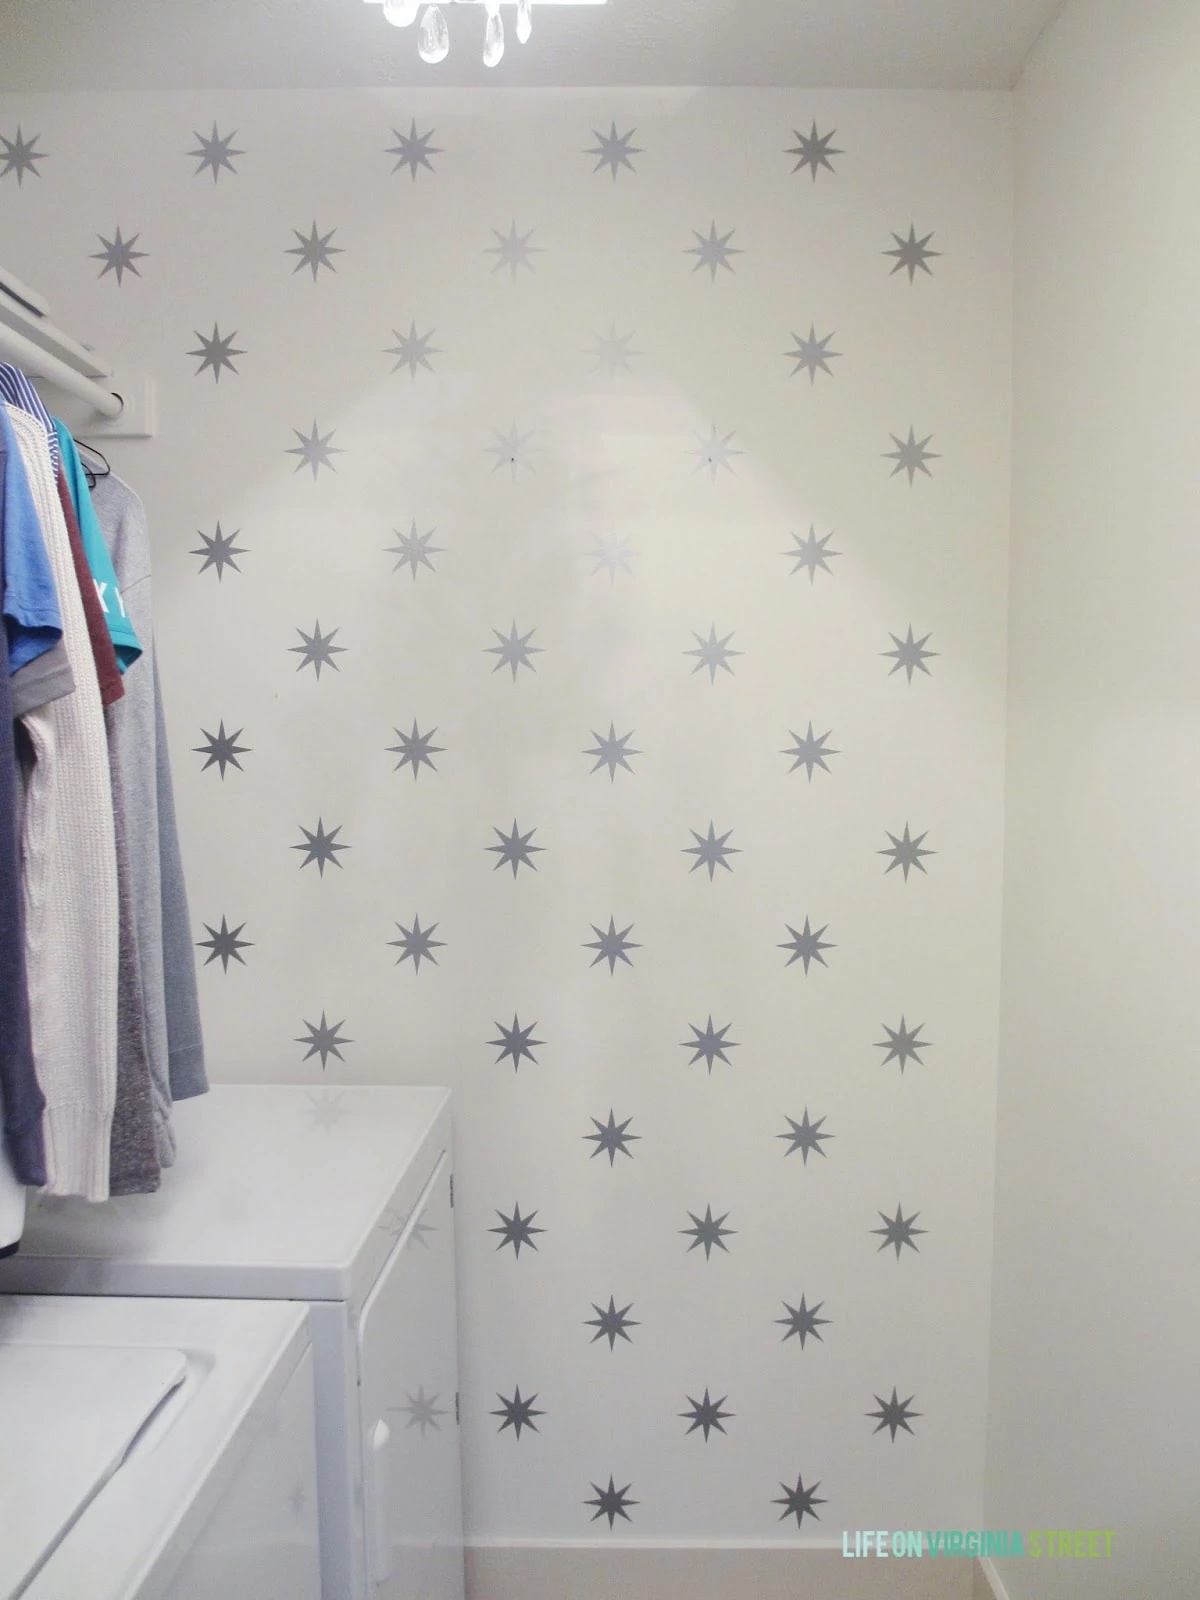 Stary wallpaper in the laundry room.